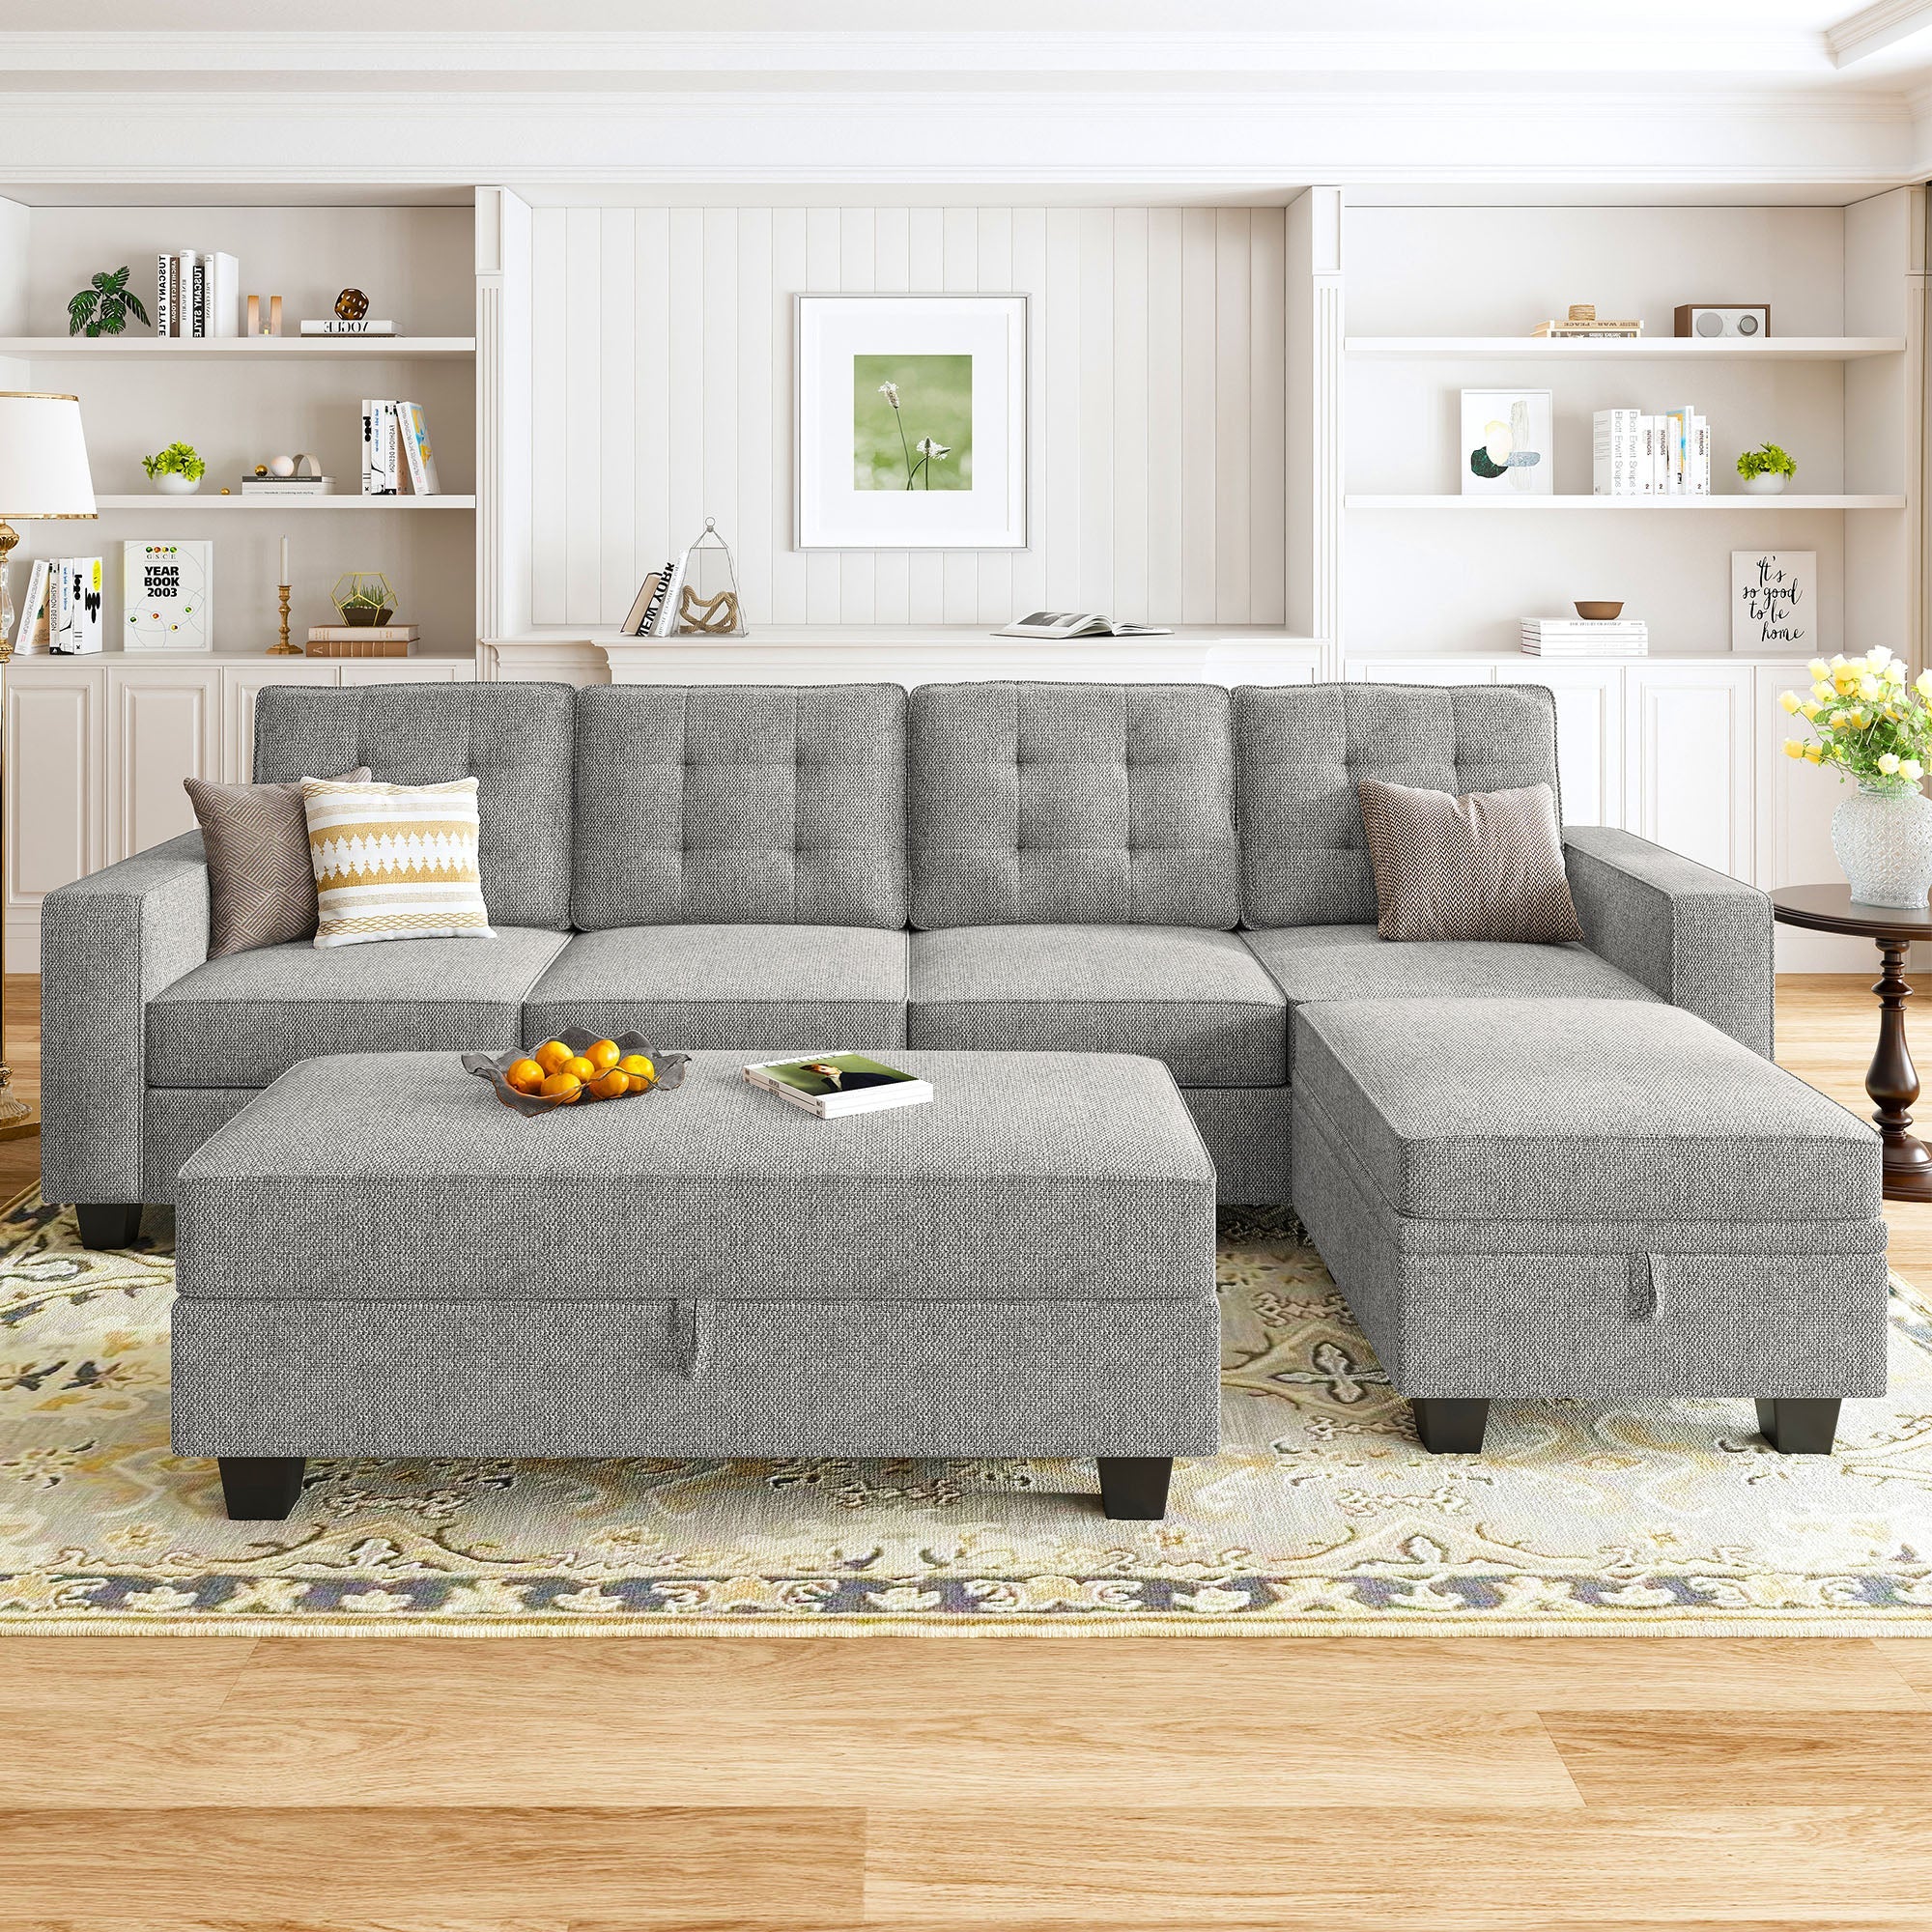 HONBAY Polyester 4 Seat L-Shaped Sectional Sofa with Rectangle Ottoman